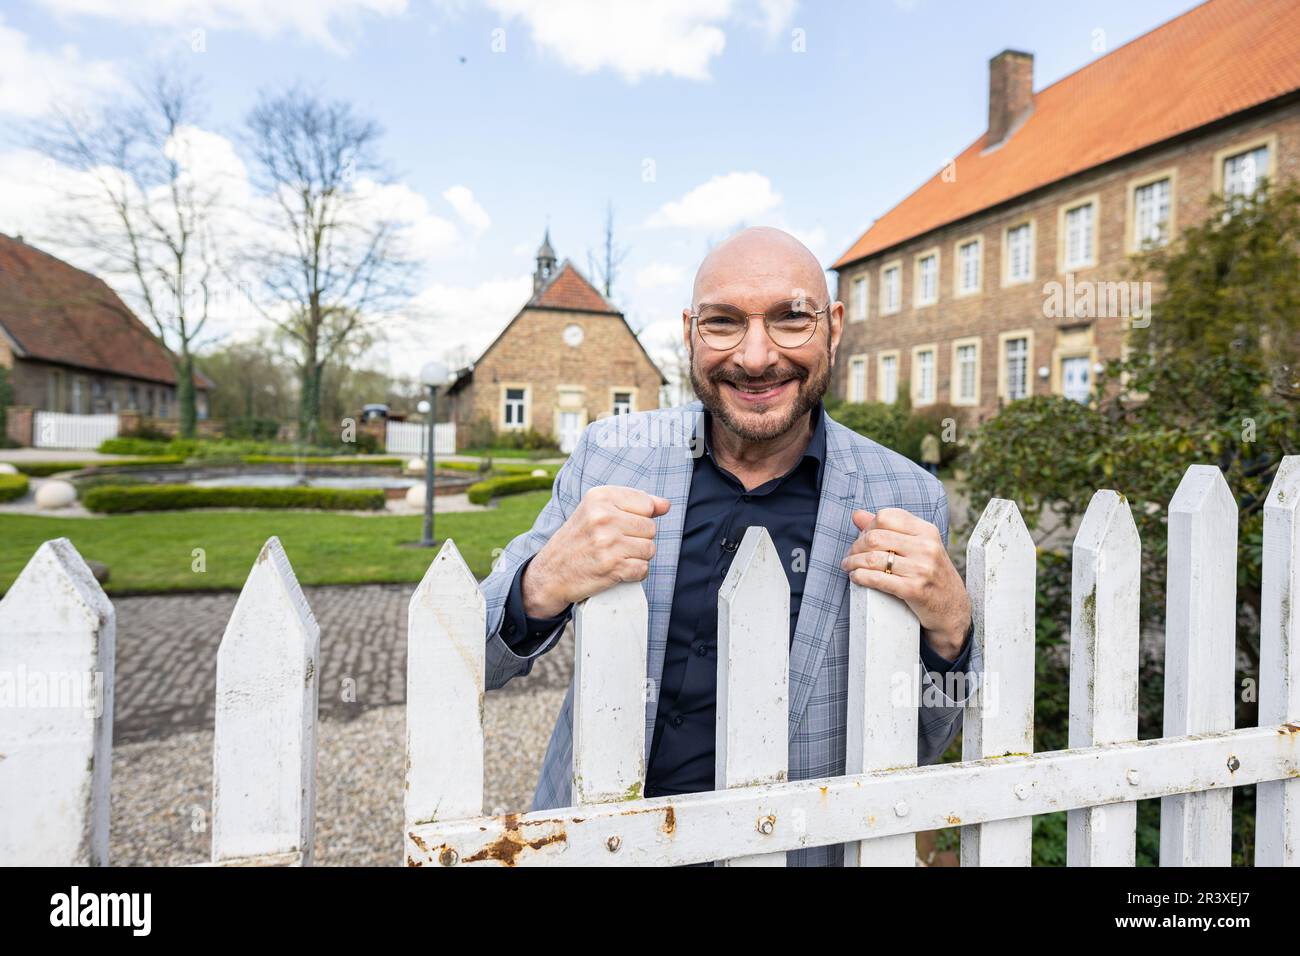 14 April 2023, North Rhine-Westphalia, Drensteinfurt: Attention blocking period until 31.05.2023 - Ralph Morgenstern stands in front of the set at the moated castle 'Haus Venne' in Drensteinfurt. Set visit for the new ARD show with Ralph Morgenstern. On 12.06.2023 starts in the ARD, in the afternoon program, a new animal show - The pet professionals. This is about pets and their owners who need help. Whether it's the rabbit that's afraid of grass or the cat that pees on the countertop. Together with pet experts, pet owners and viewers here get valuable tips, peppered with fun fun facts and ane Stock Photo